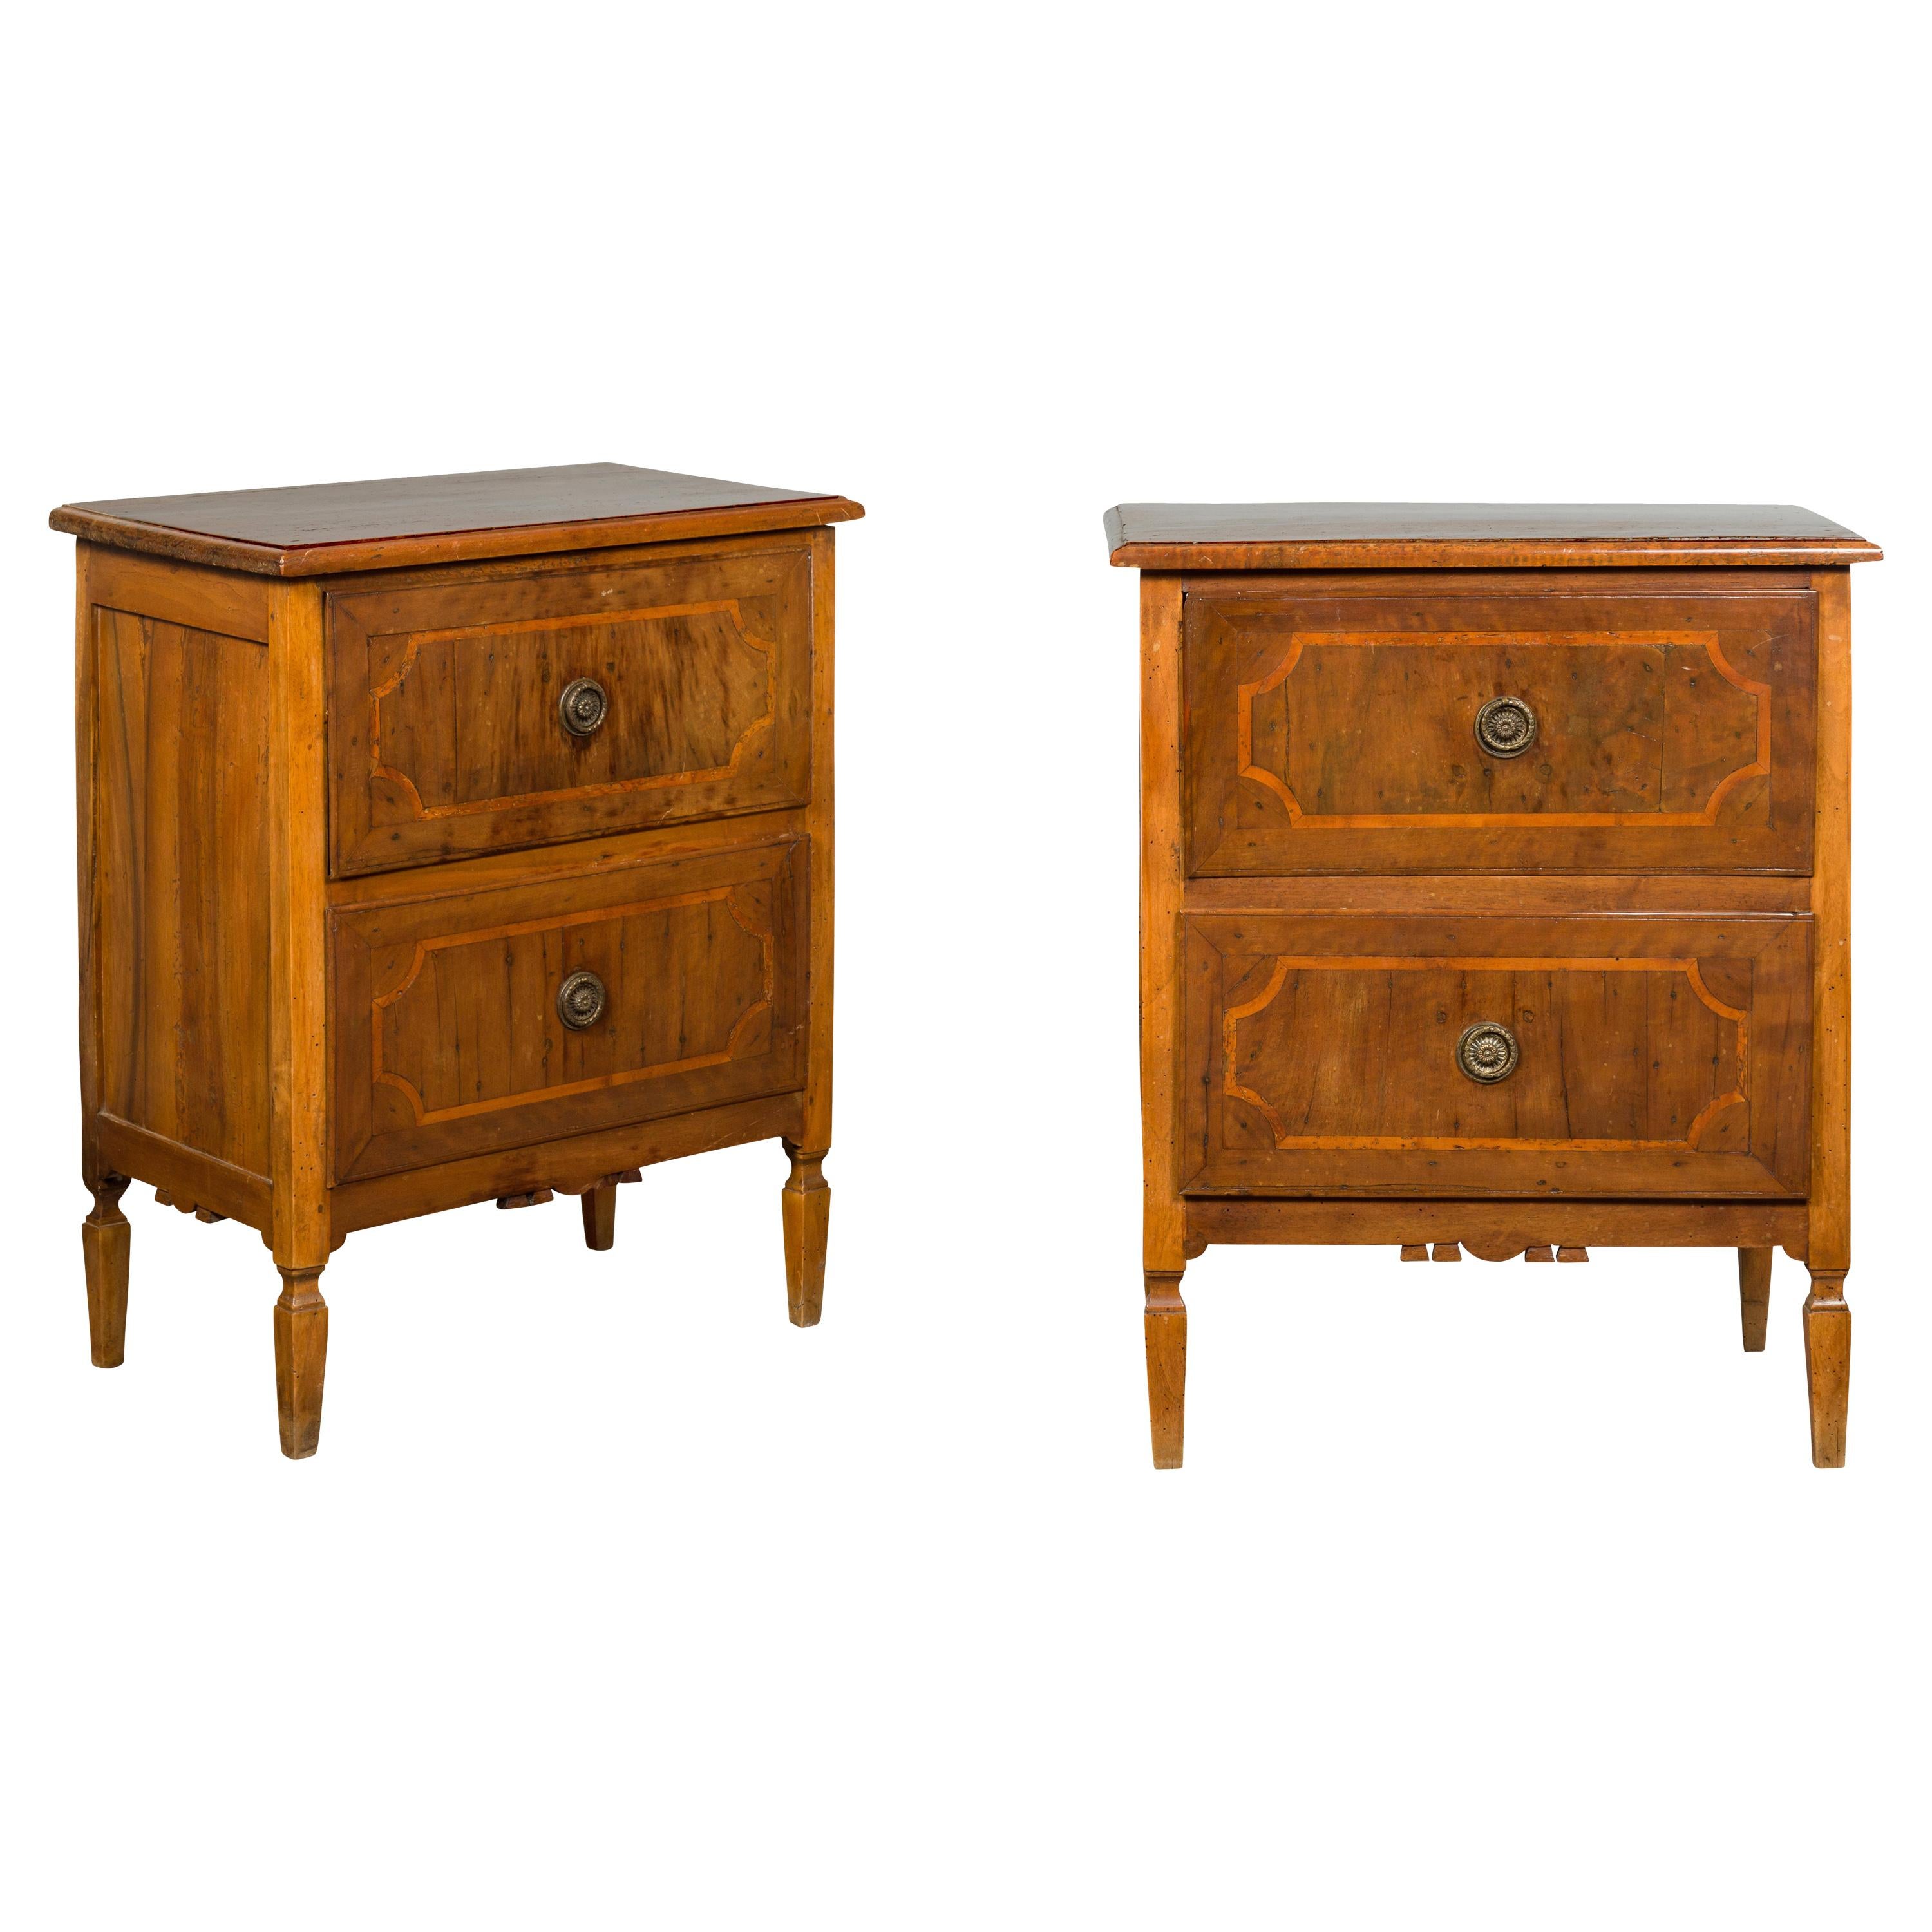 Pair of Petite Italian Walnut Two-Drawer Chests with Banding and Carved Aprons